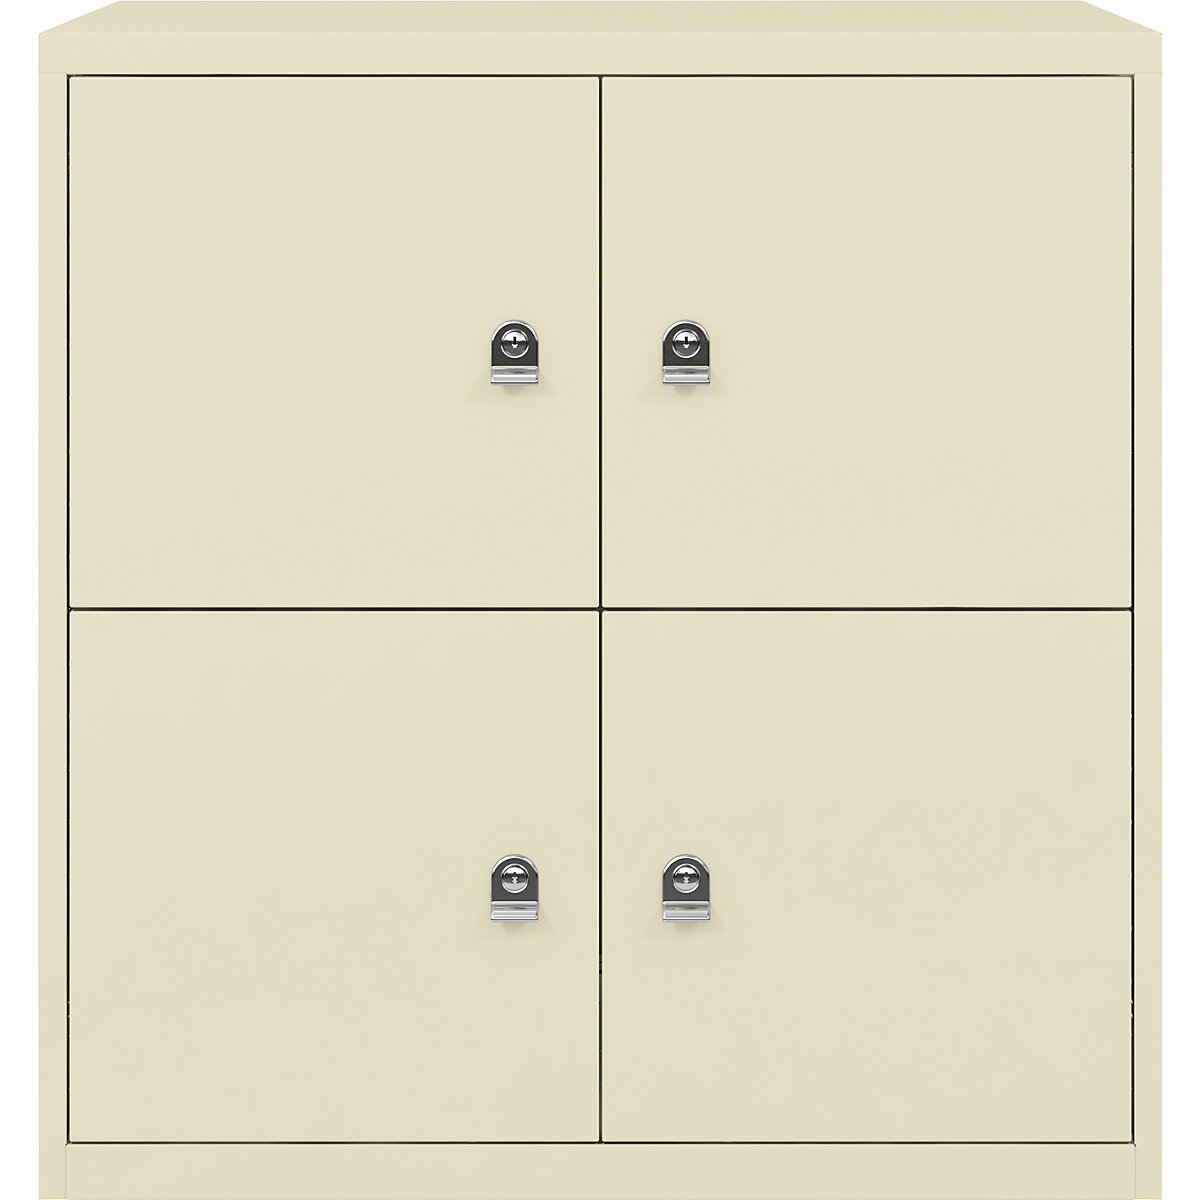 BISLEY – LateralFile™ lodge, with 4 lockable compartments, height 375 mm each, light ivory